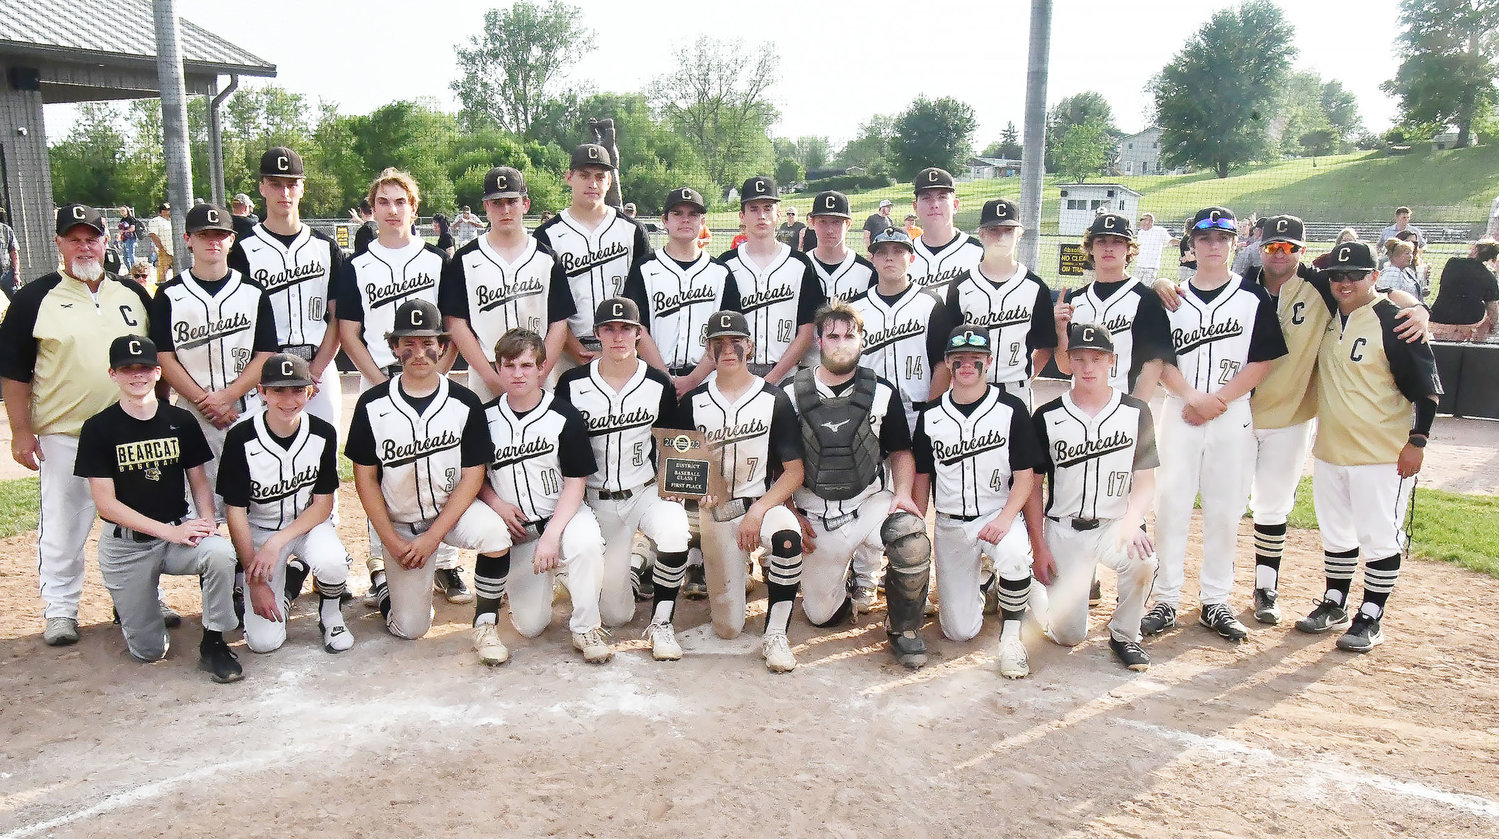 The Cairo baseball team is all smiles after winning the Class 1 District 12 championship on Tuesday evening at John Donaldson Field in Glasgow.